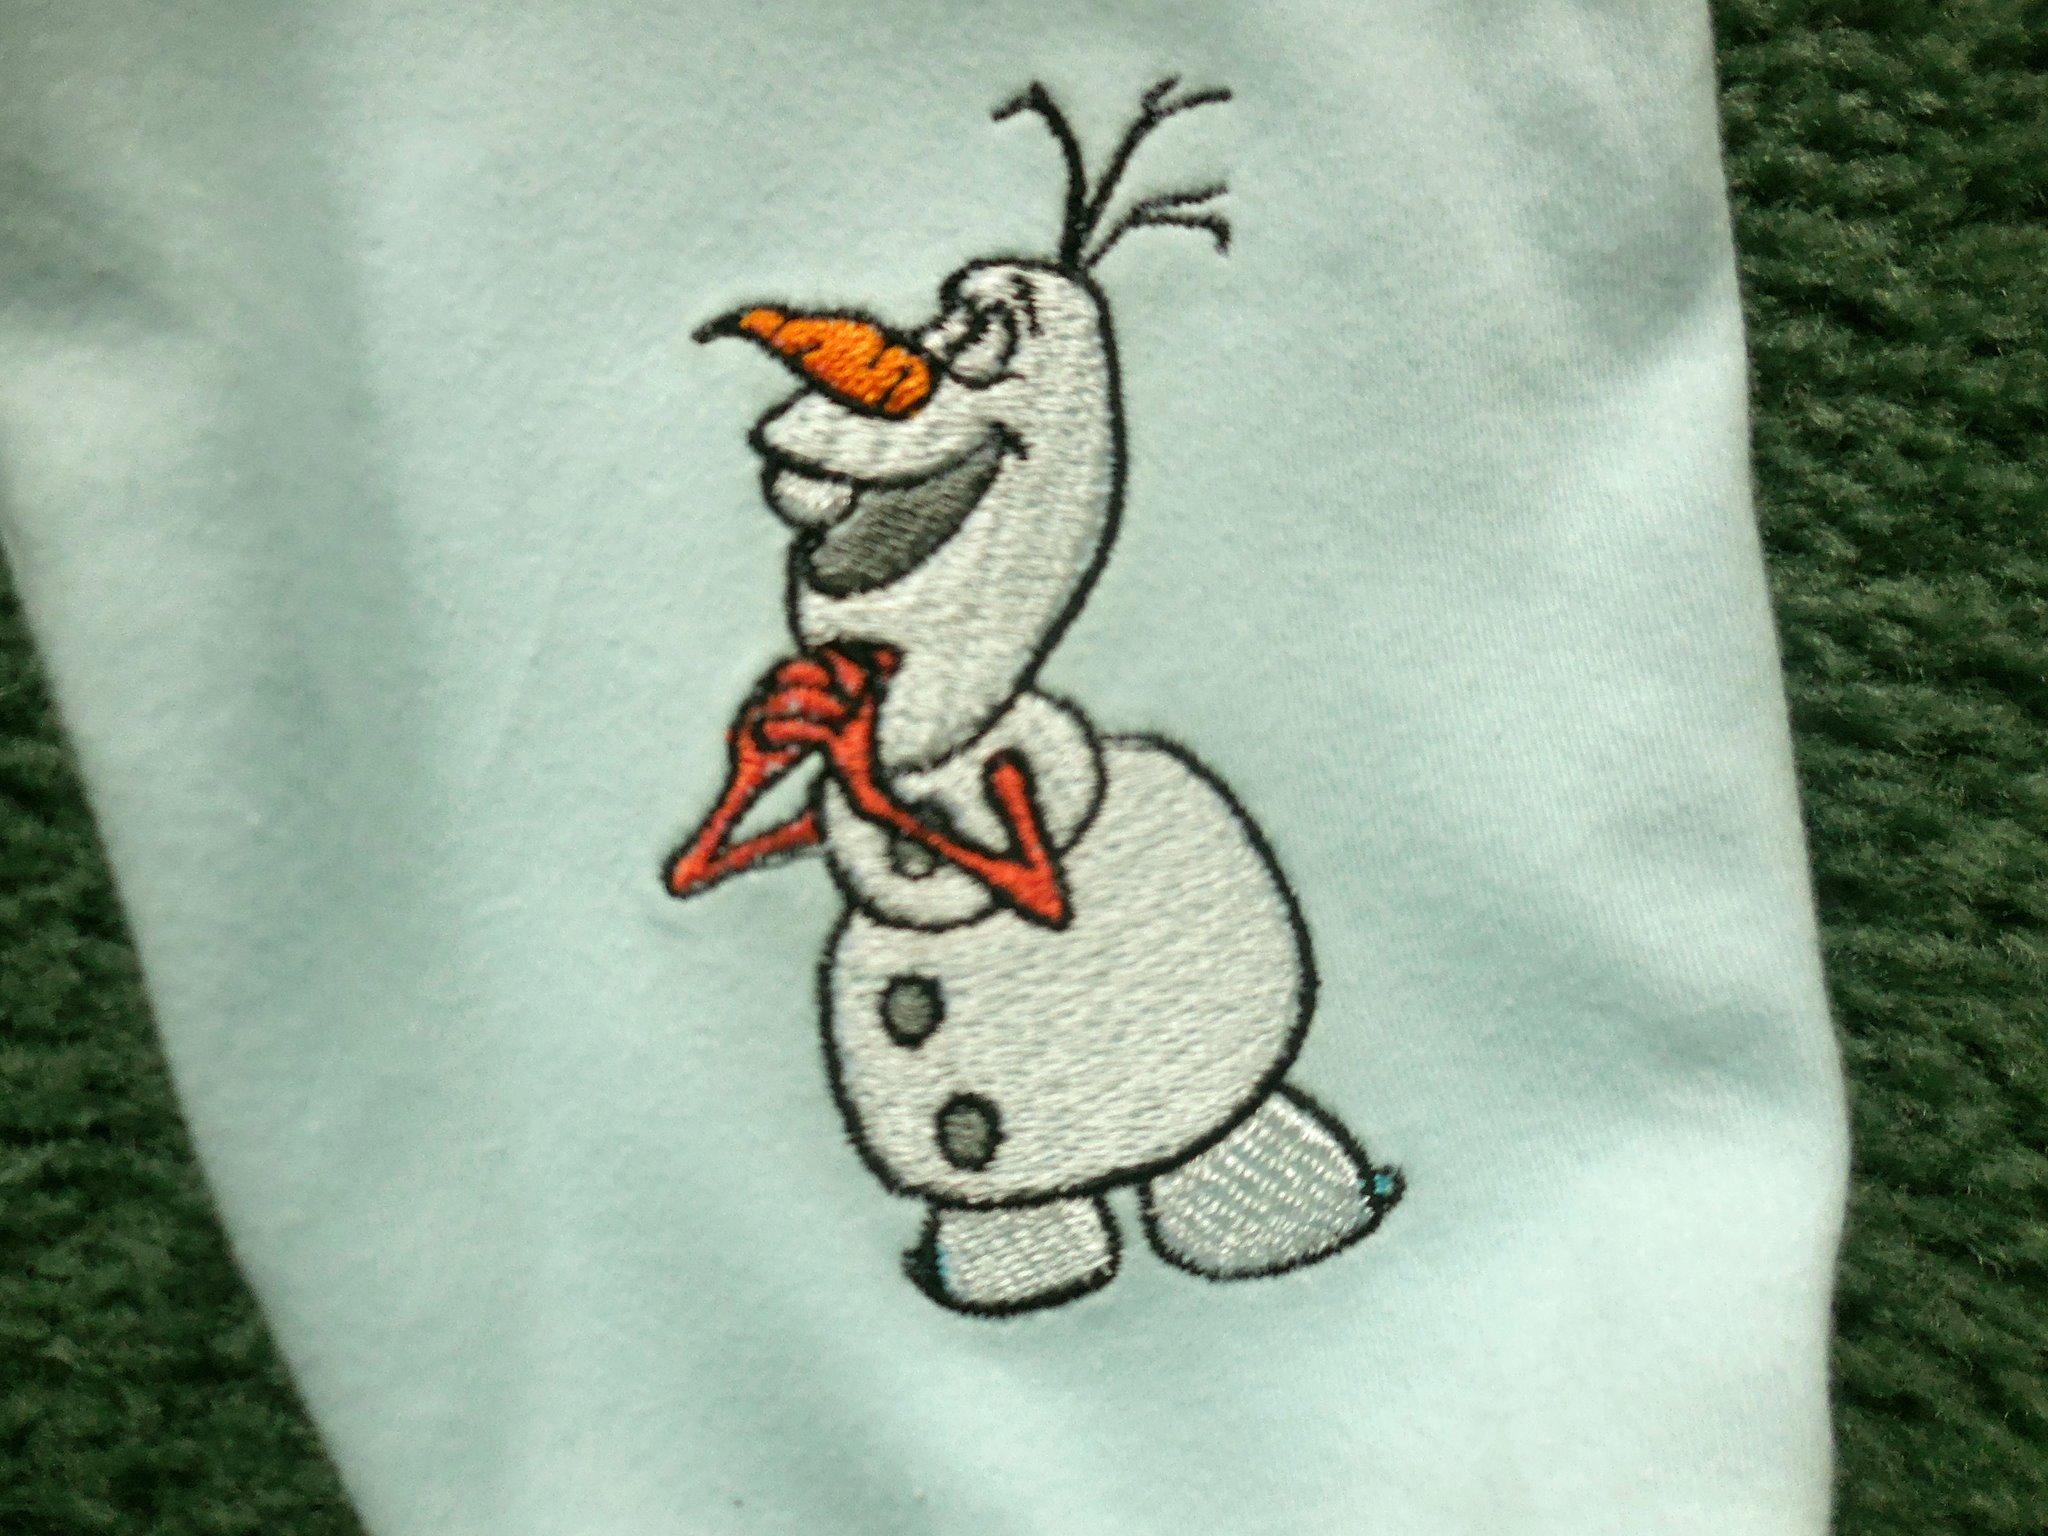 Kids' pajamas with Olaf the Snowman from Frozen (closer look)